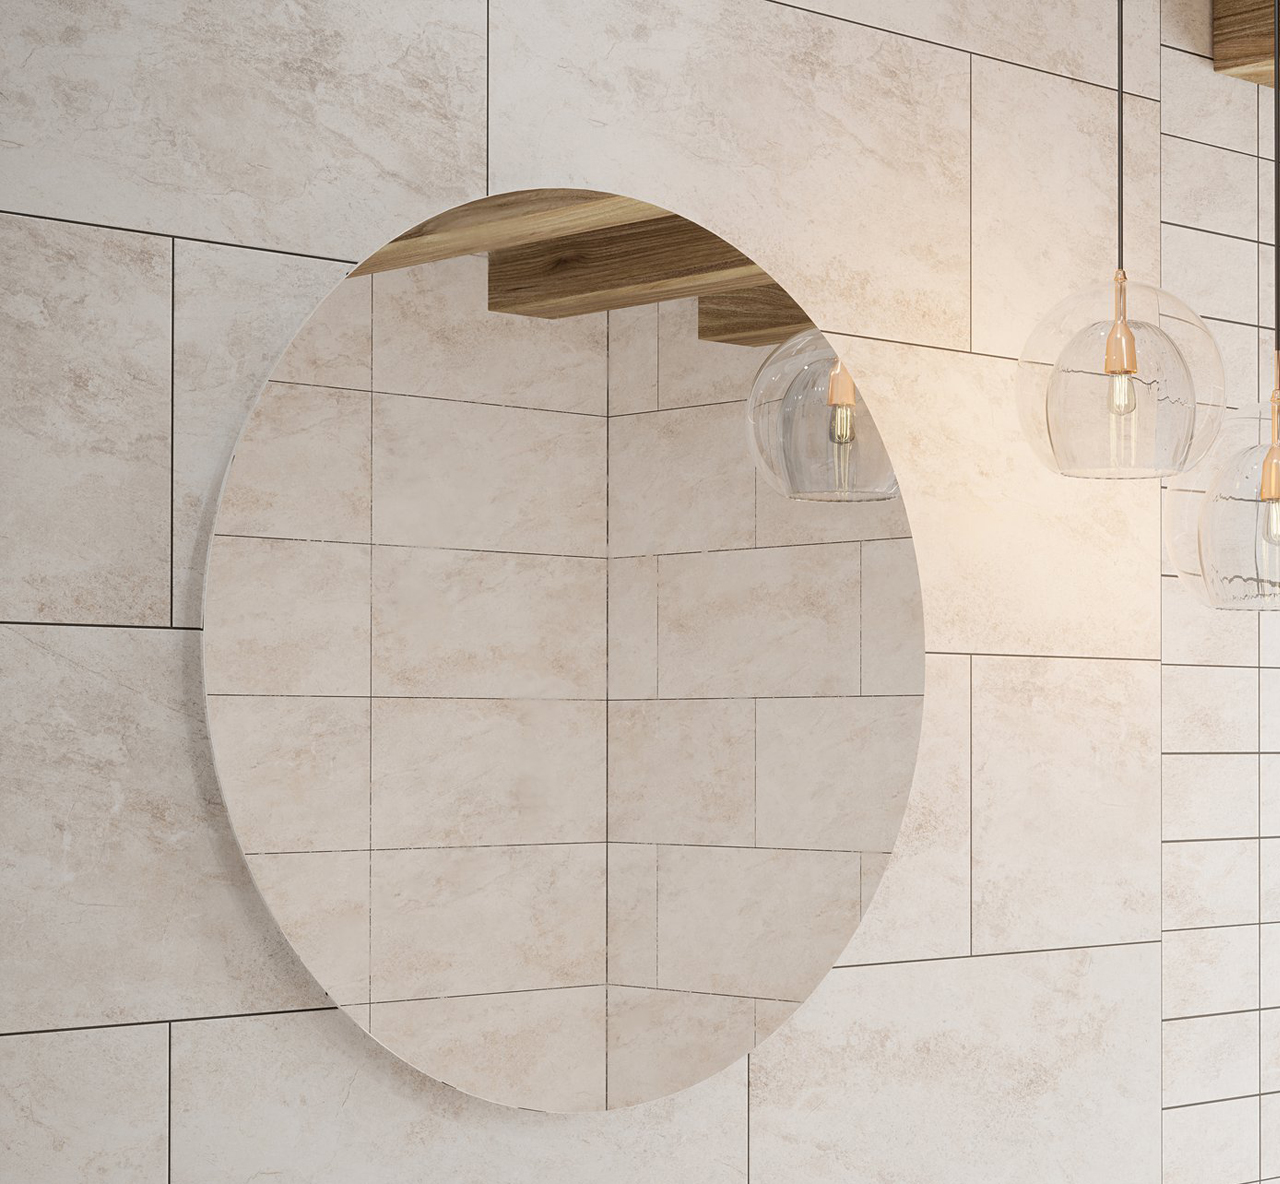 Johnsons Arlo Shale Beige Wall Tiles used with hanging lights and a round mirror